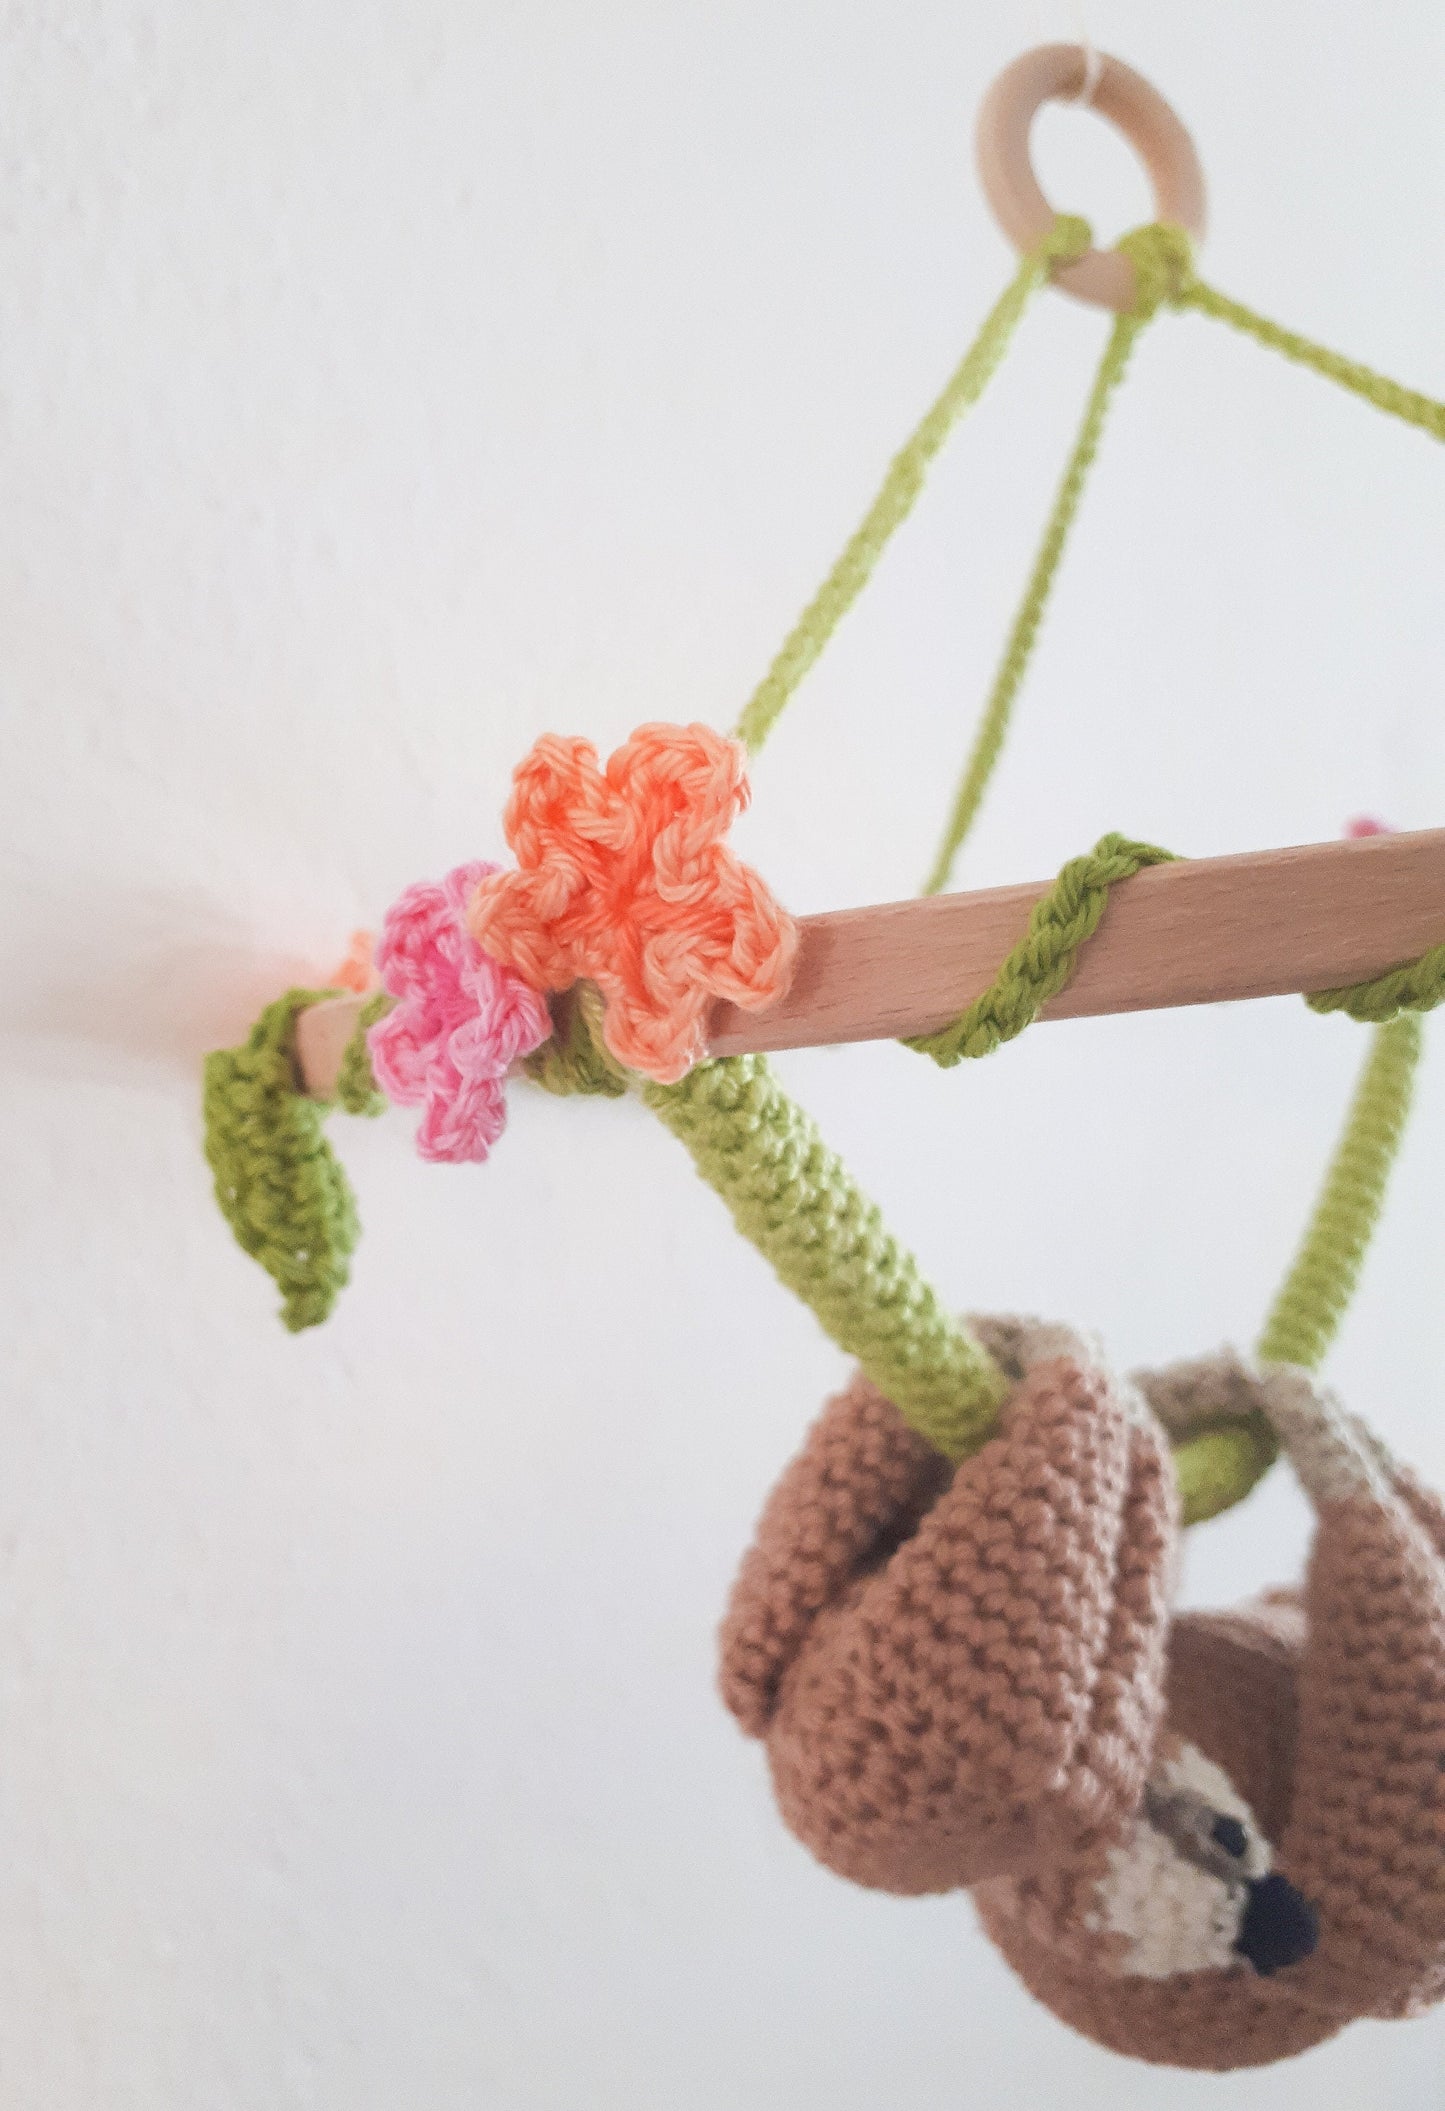 Sloth baby mobile with flowers, floral nursery decor